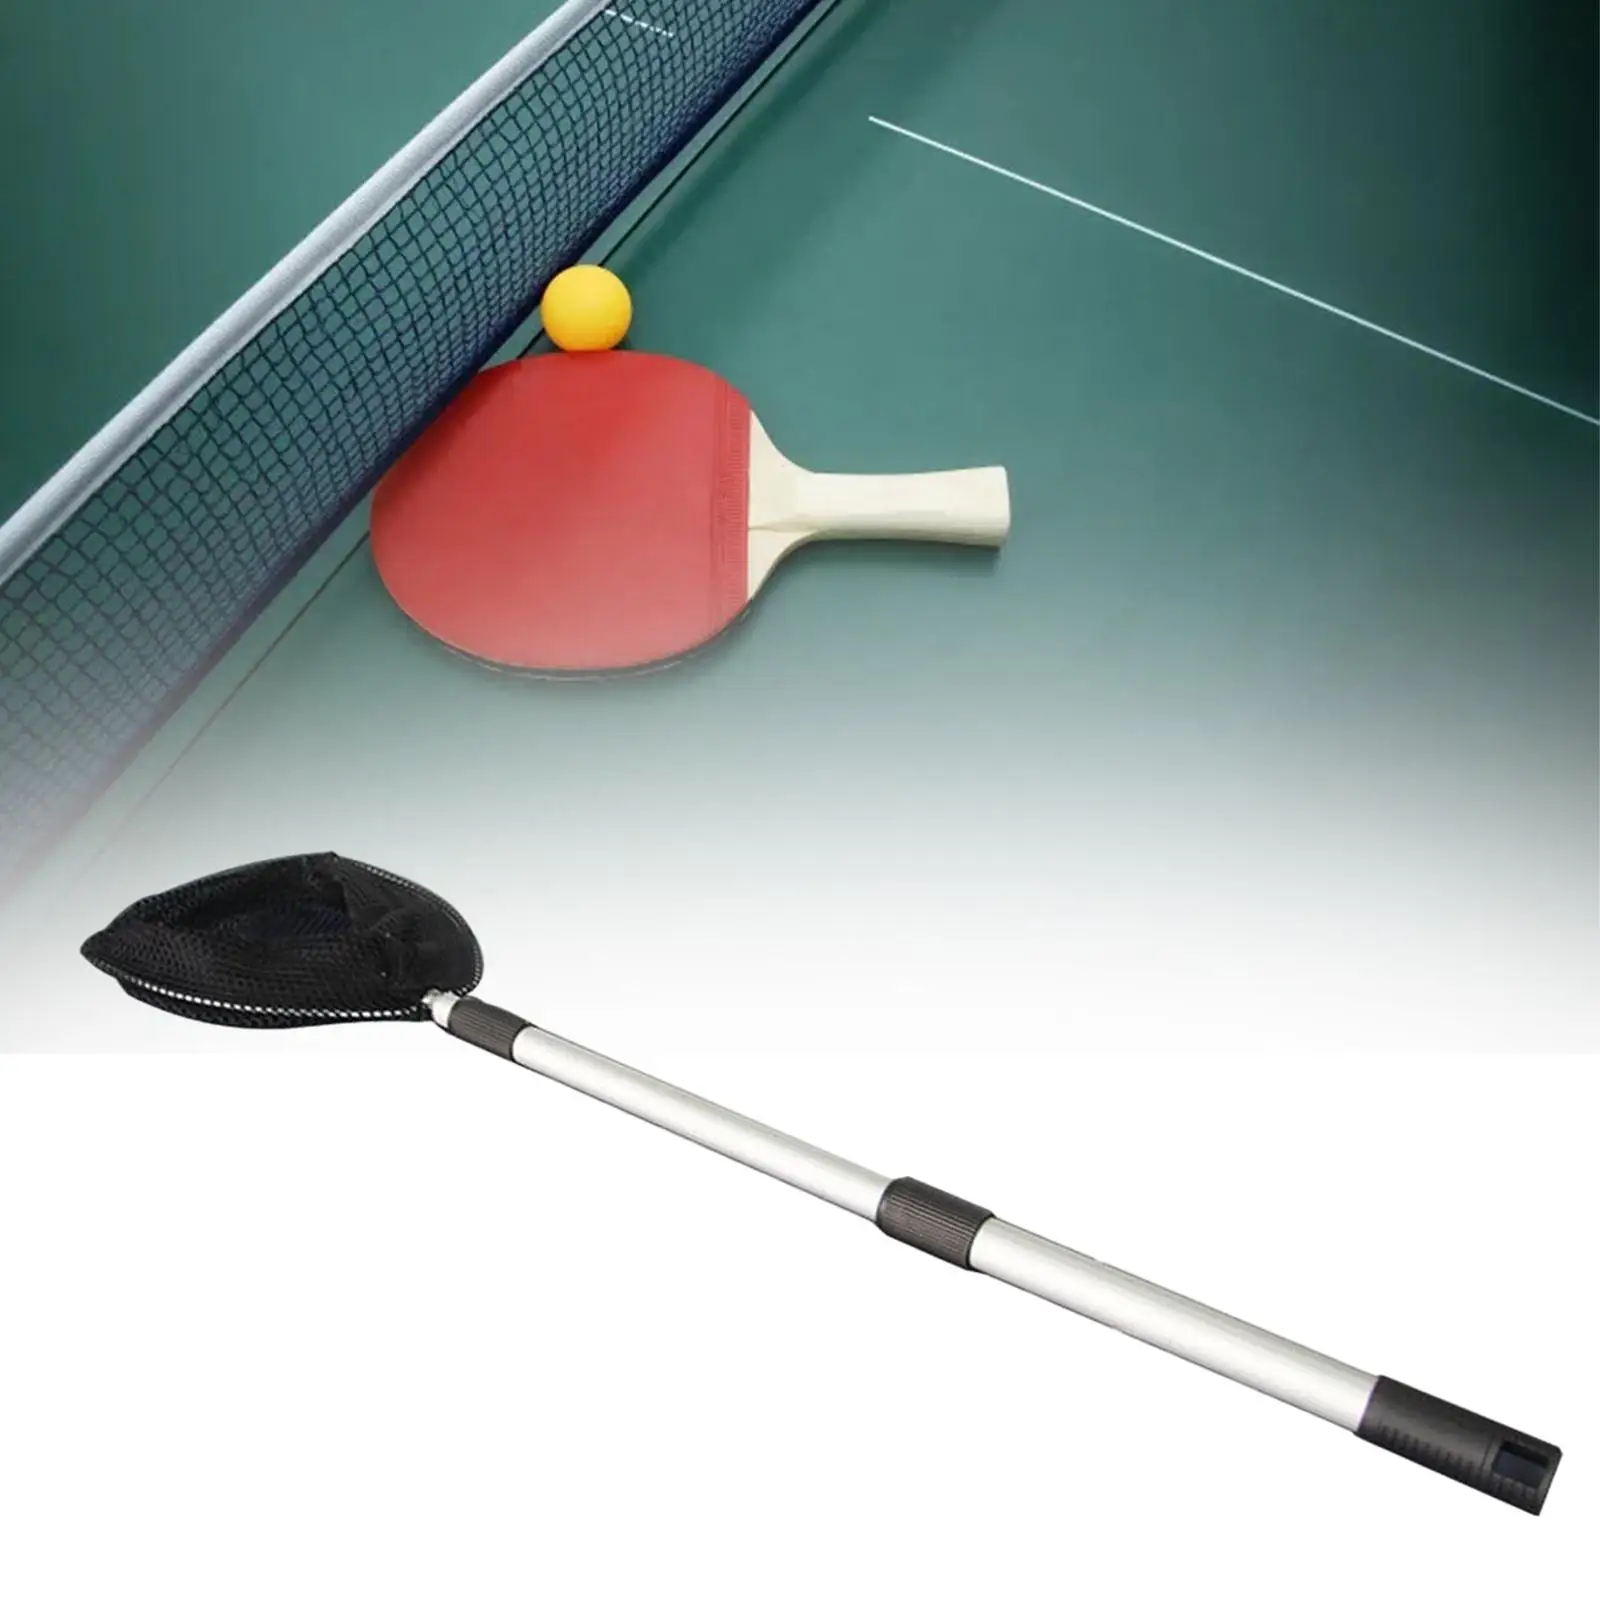 Telescopic Rod Table Tennis Ball Picker Pingpong Ball Retriever Picking and Storage Balls Collector Training Gym Accessory Black